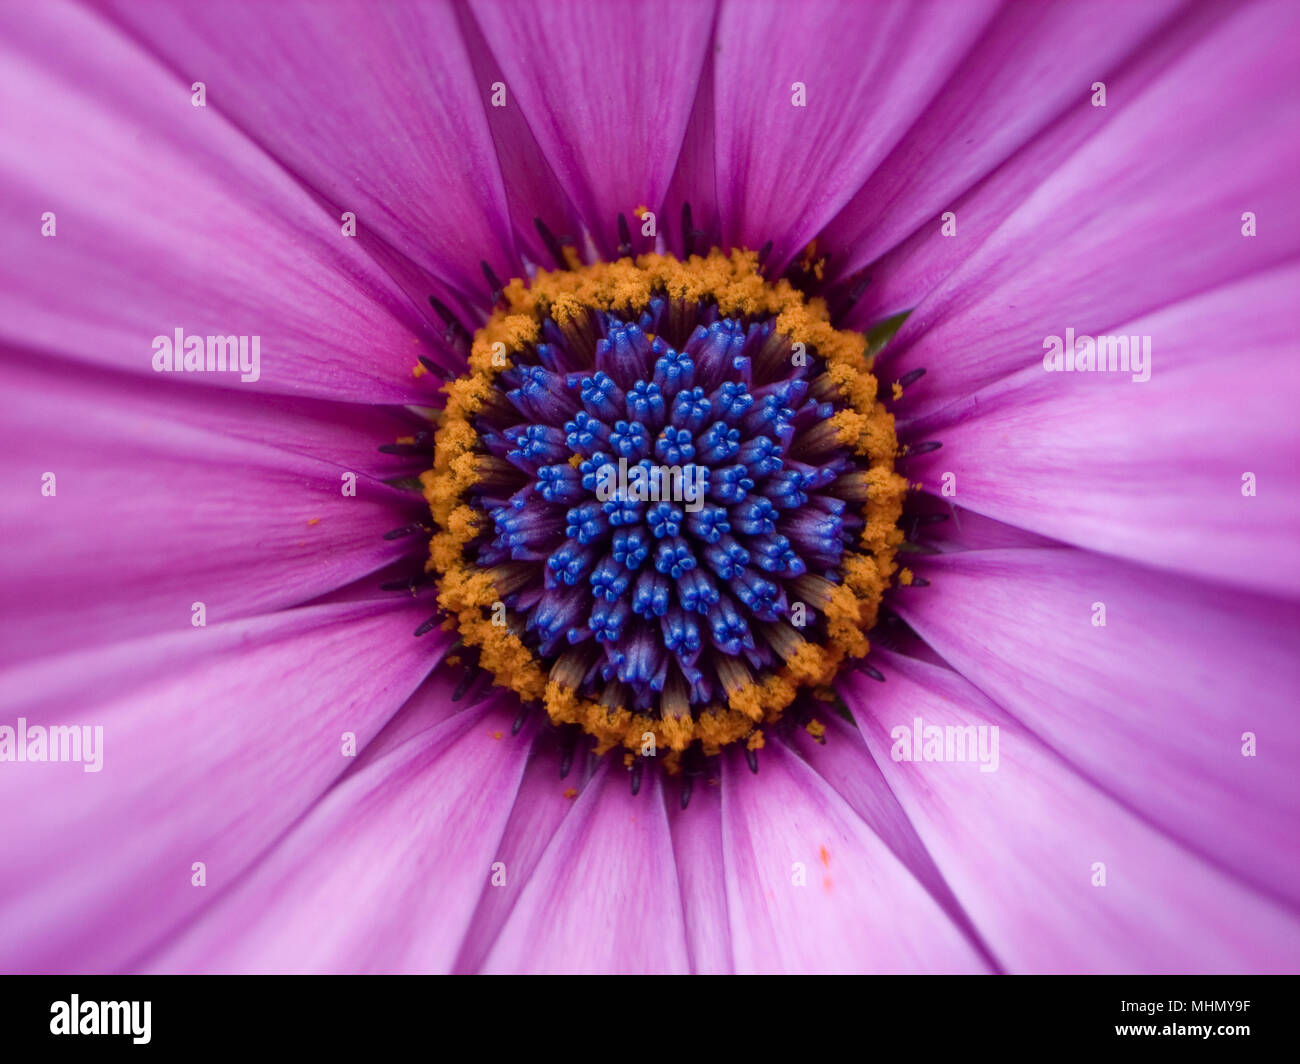 Macro image showing a pink osteospermum flower, selective focus on the centre of flower. Stock Photo